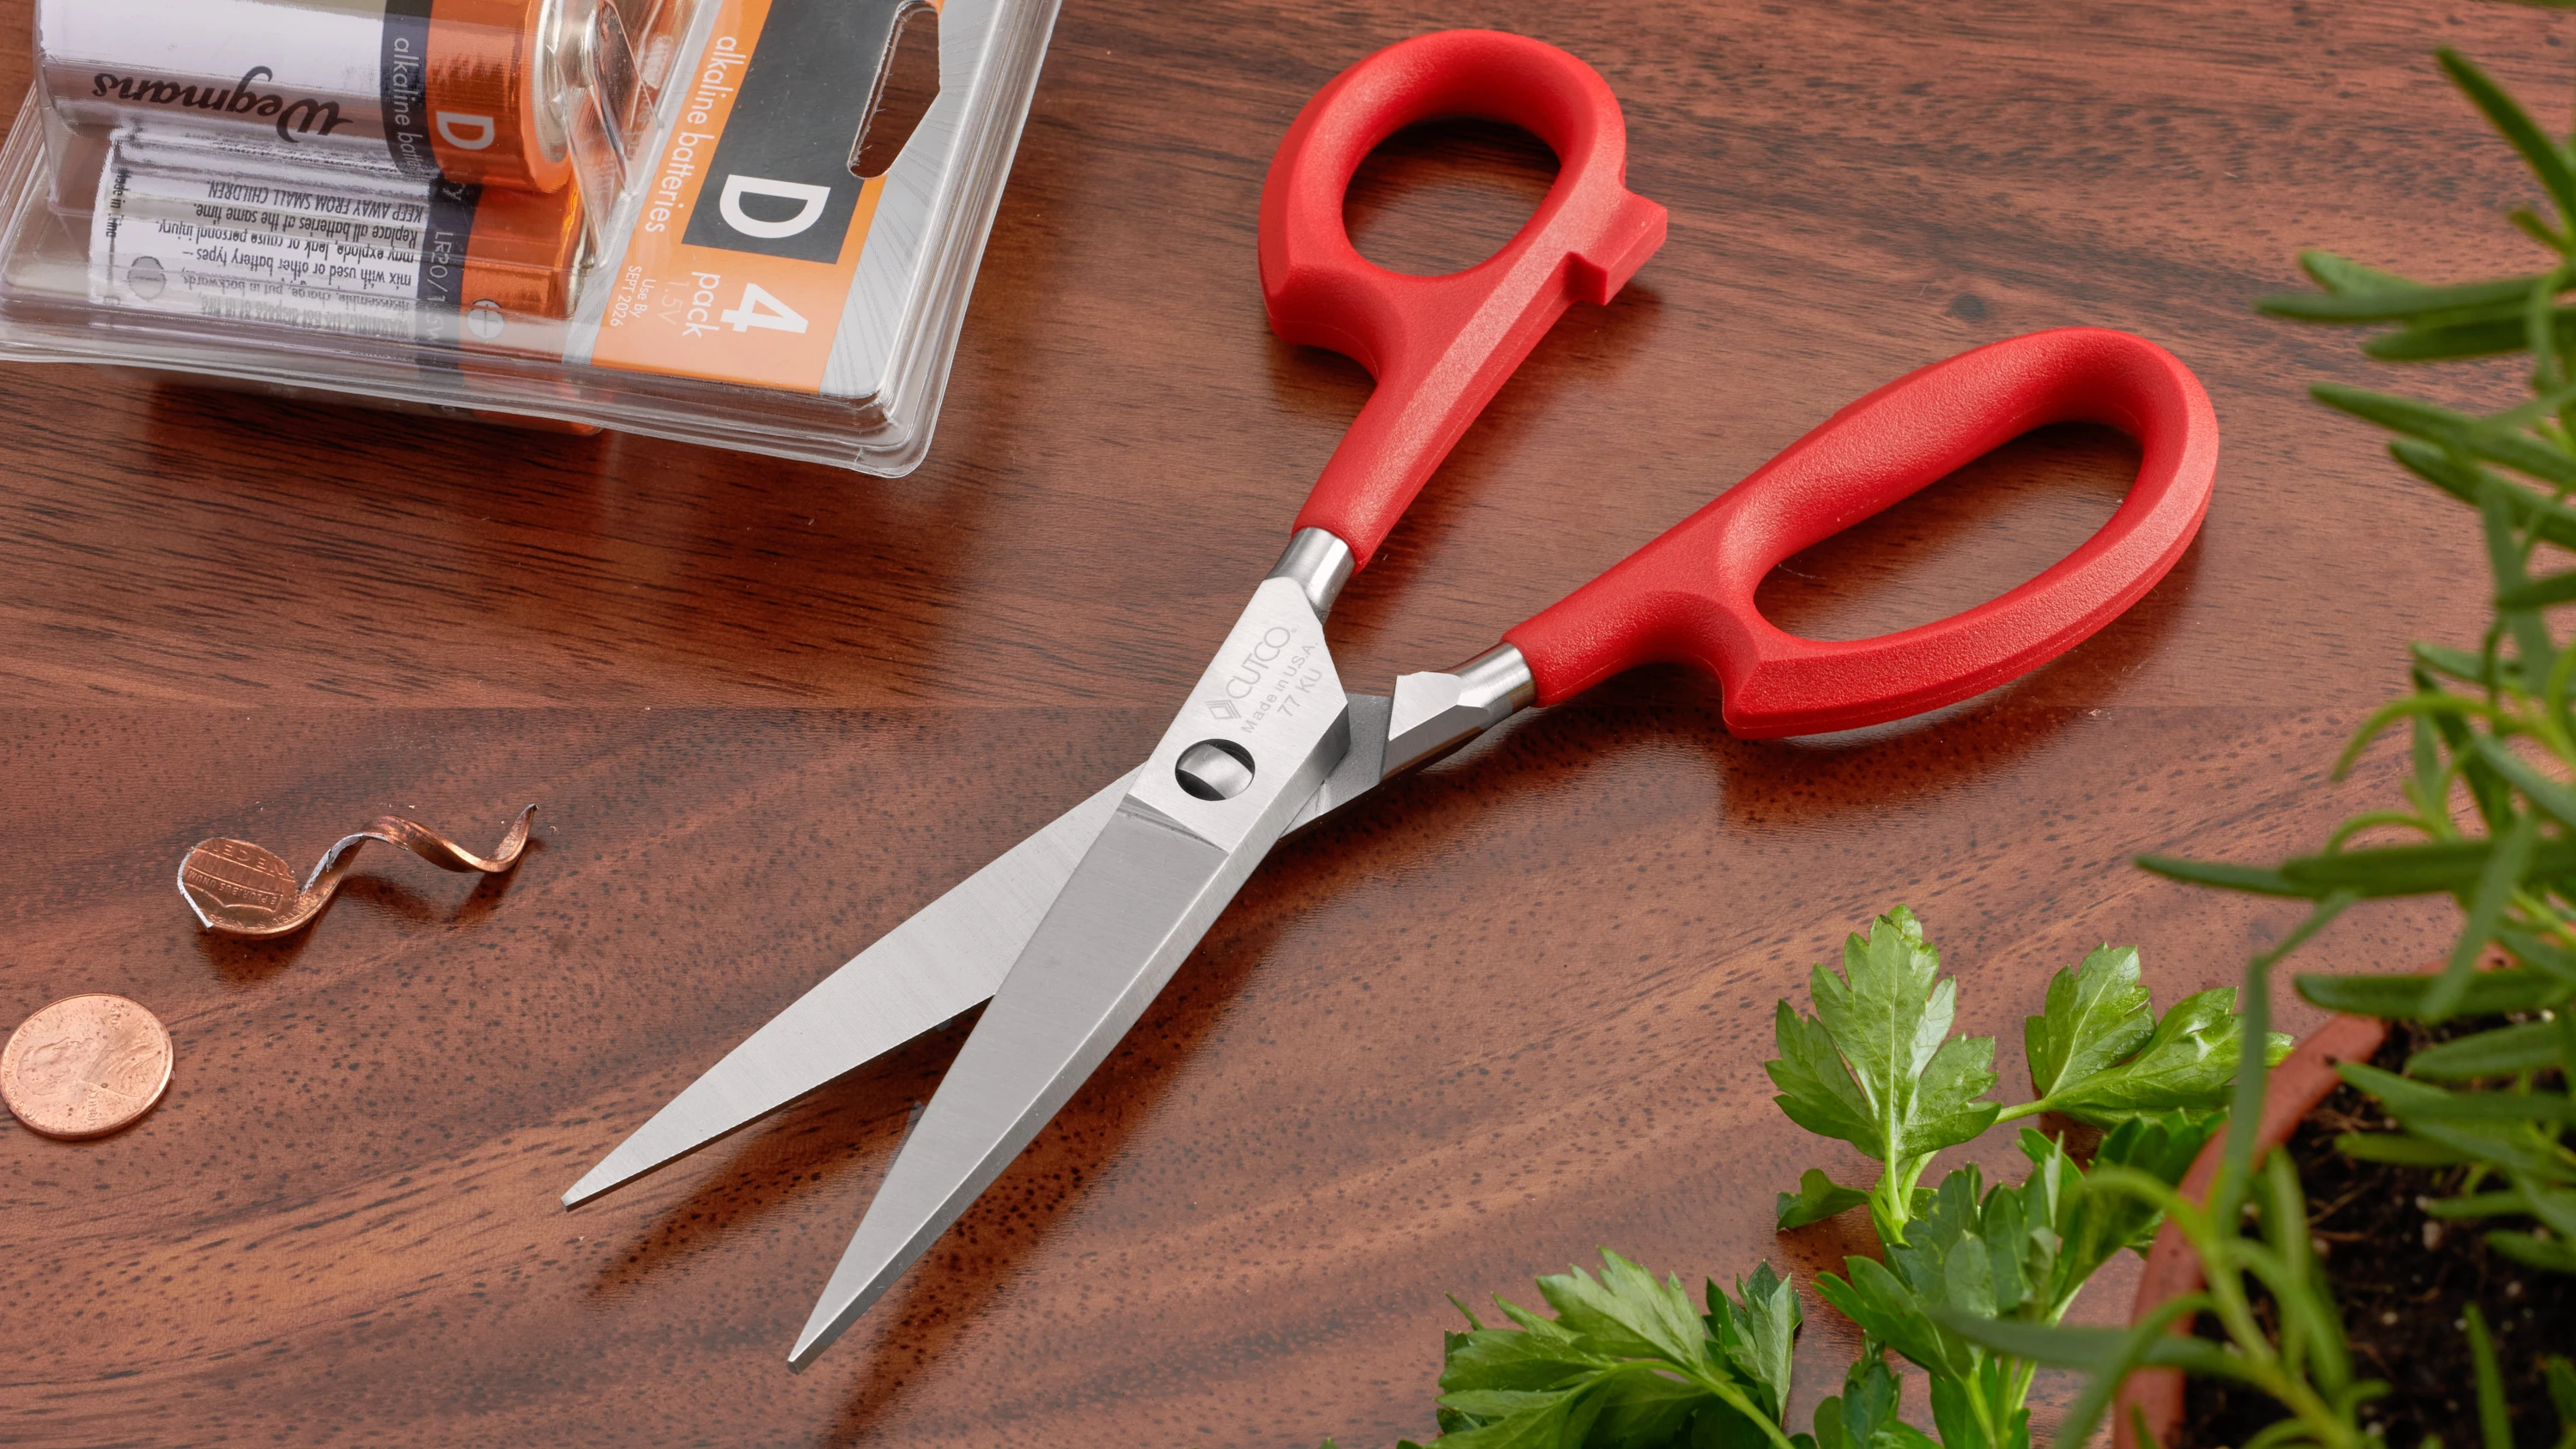 Things that work for us # 09 - CUTCO Shears and Knives